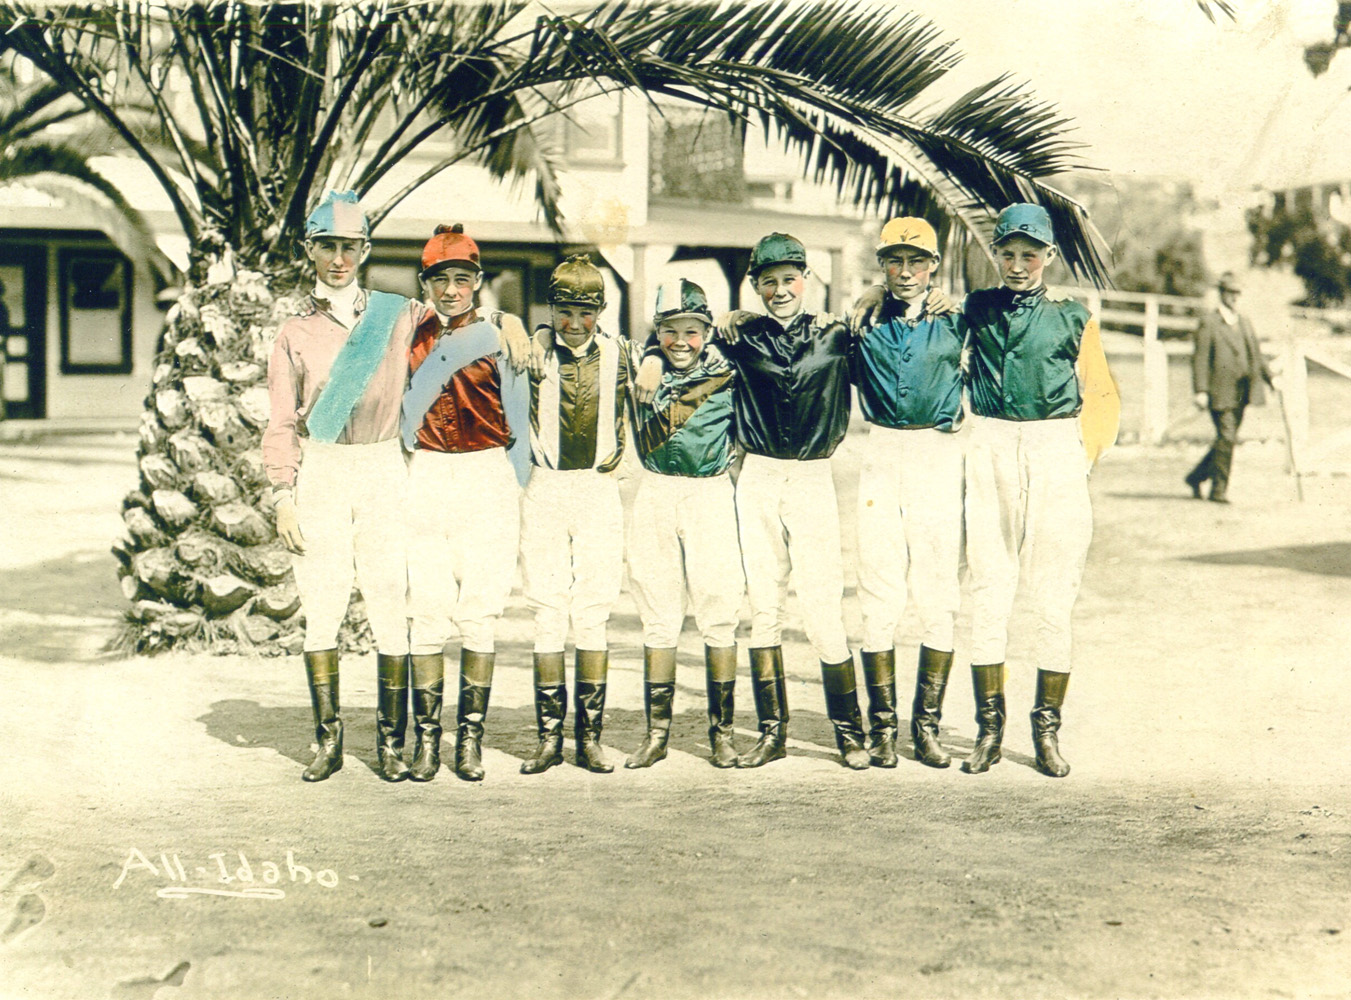 Colorized photograph of a jockey colony featuring Laverne Fator, Mark Fator, Art Mortensen, G. Dick Johnson, Ivan Parke, and two unidentified riders (from left to right) (Museum Collection)